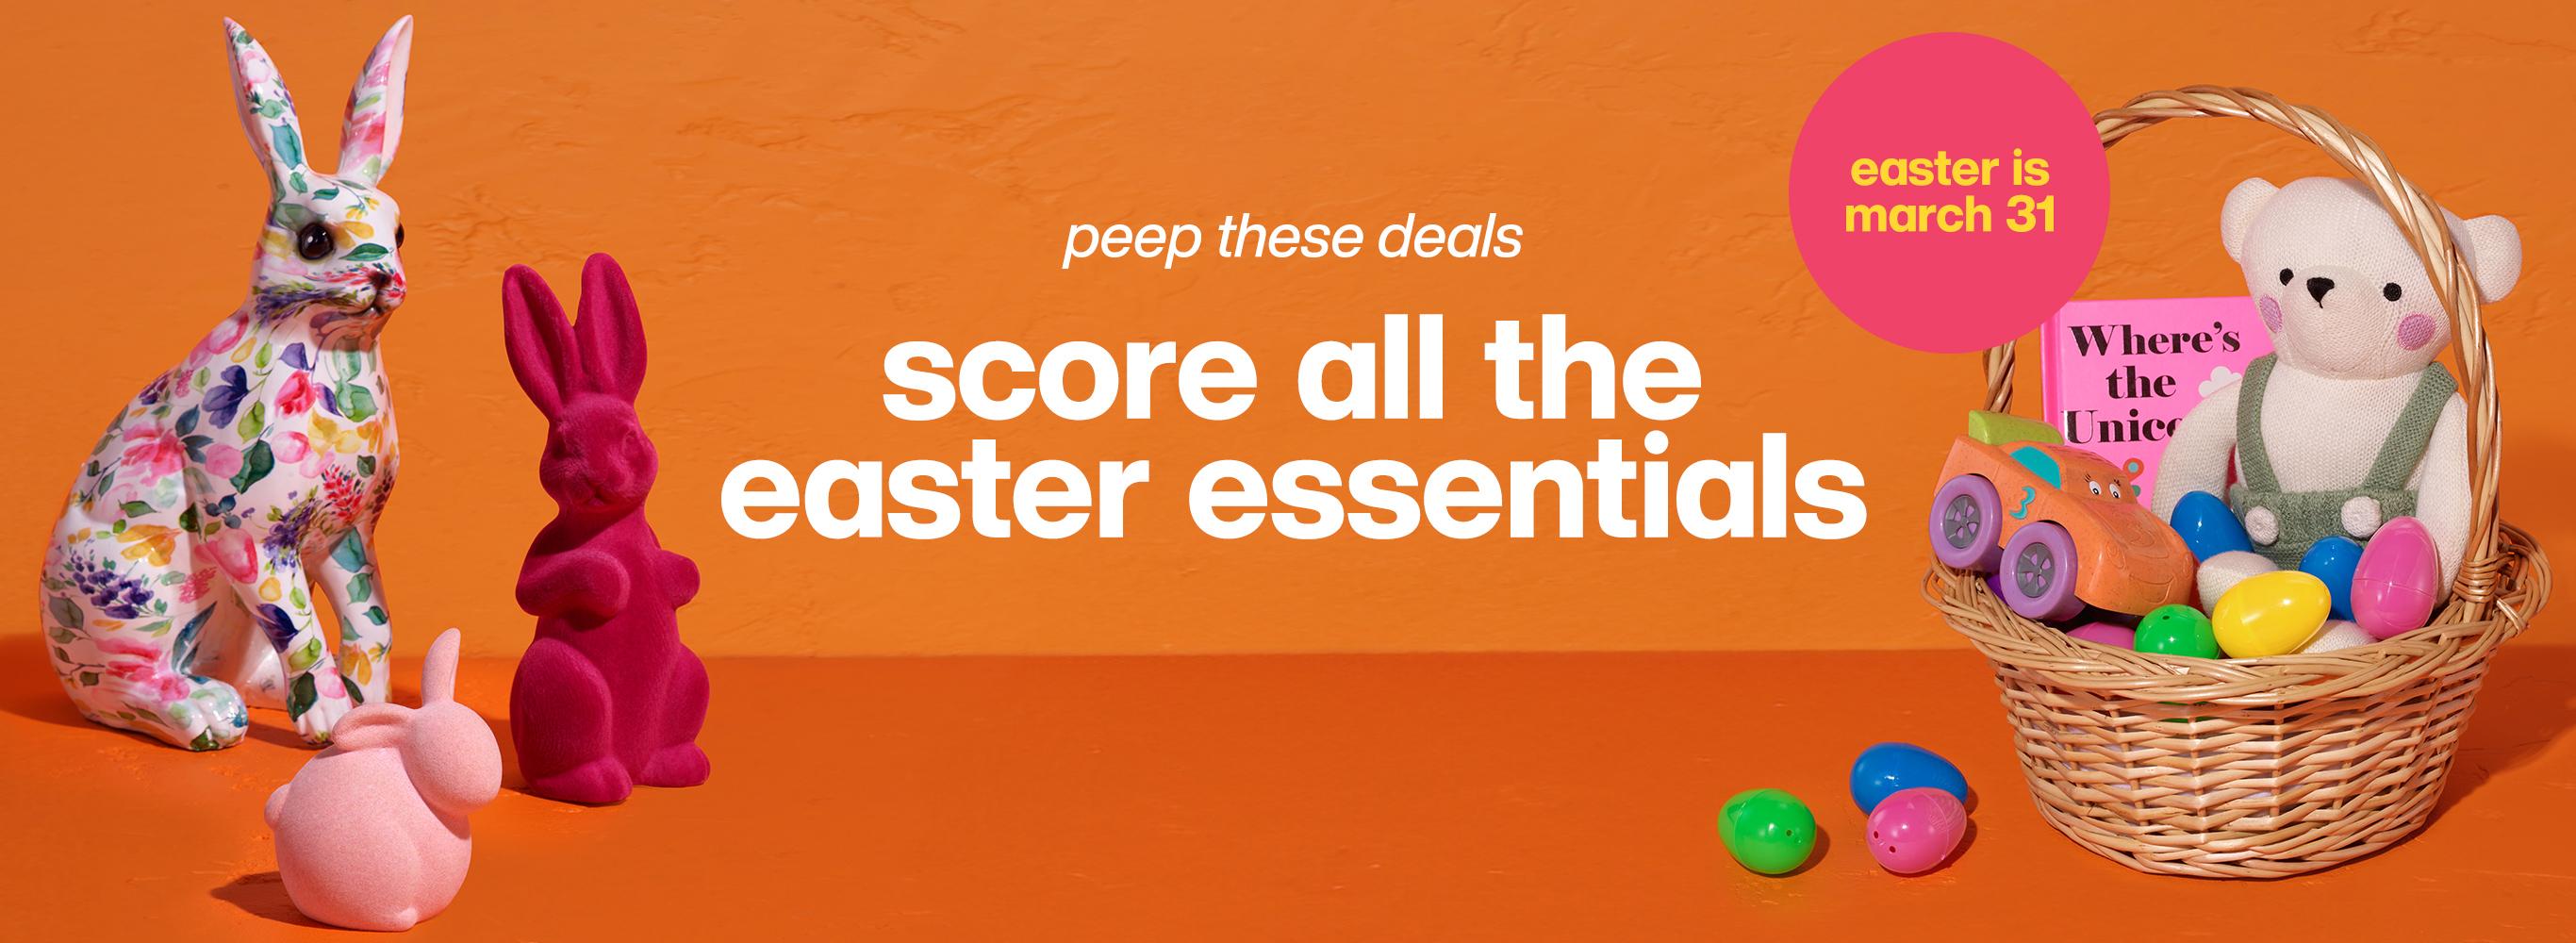 Peep these deals. Score all the easter essentials. Easter is March 31.